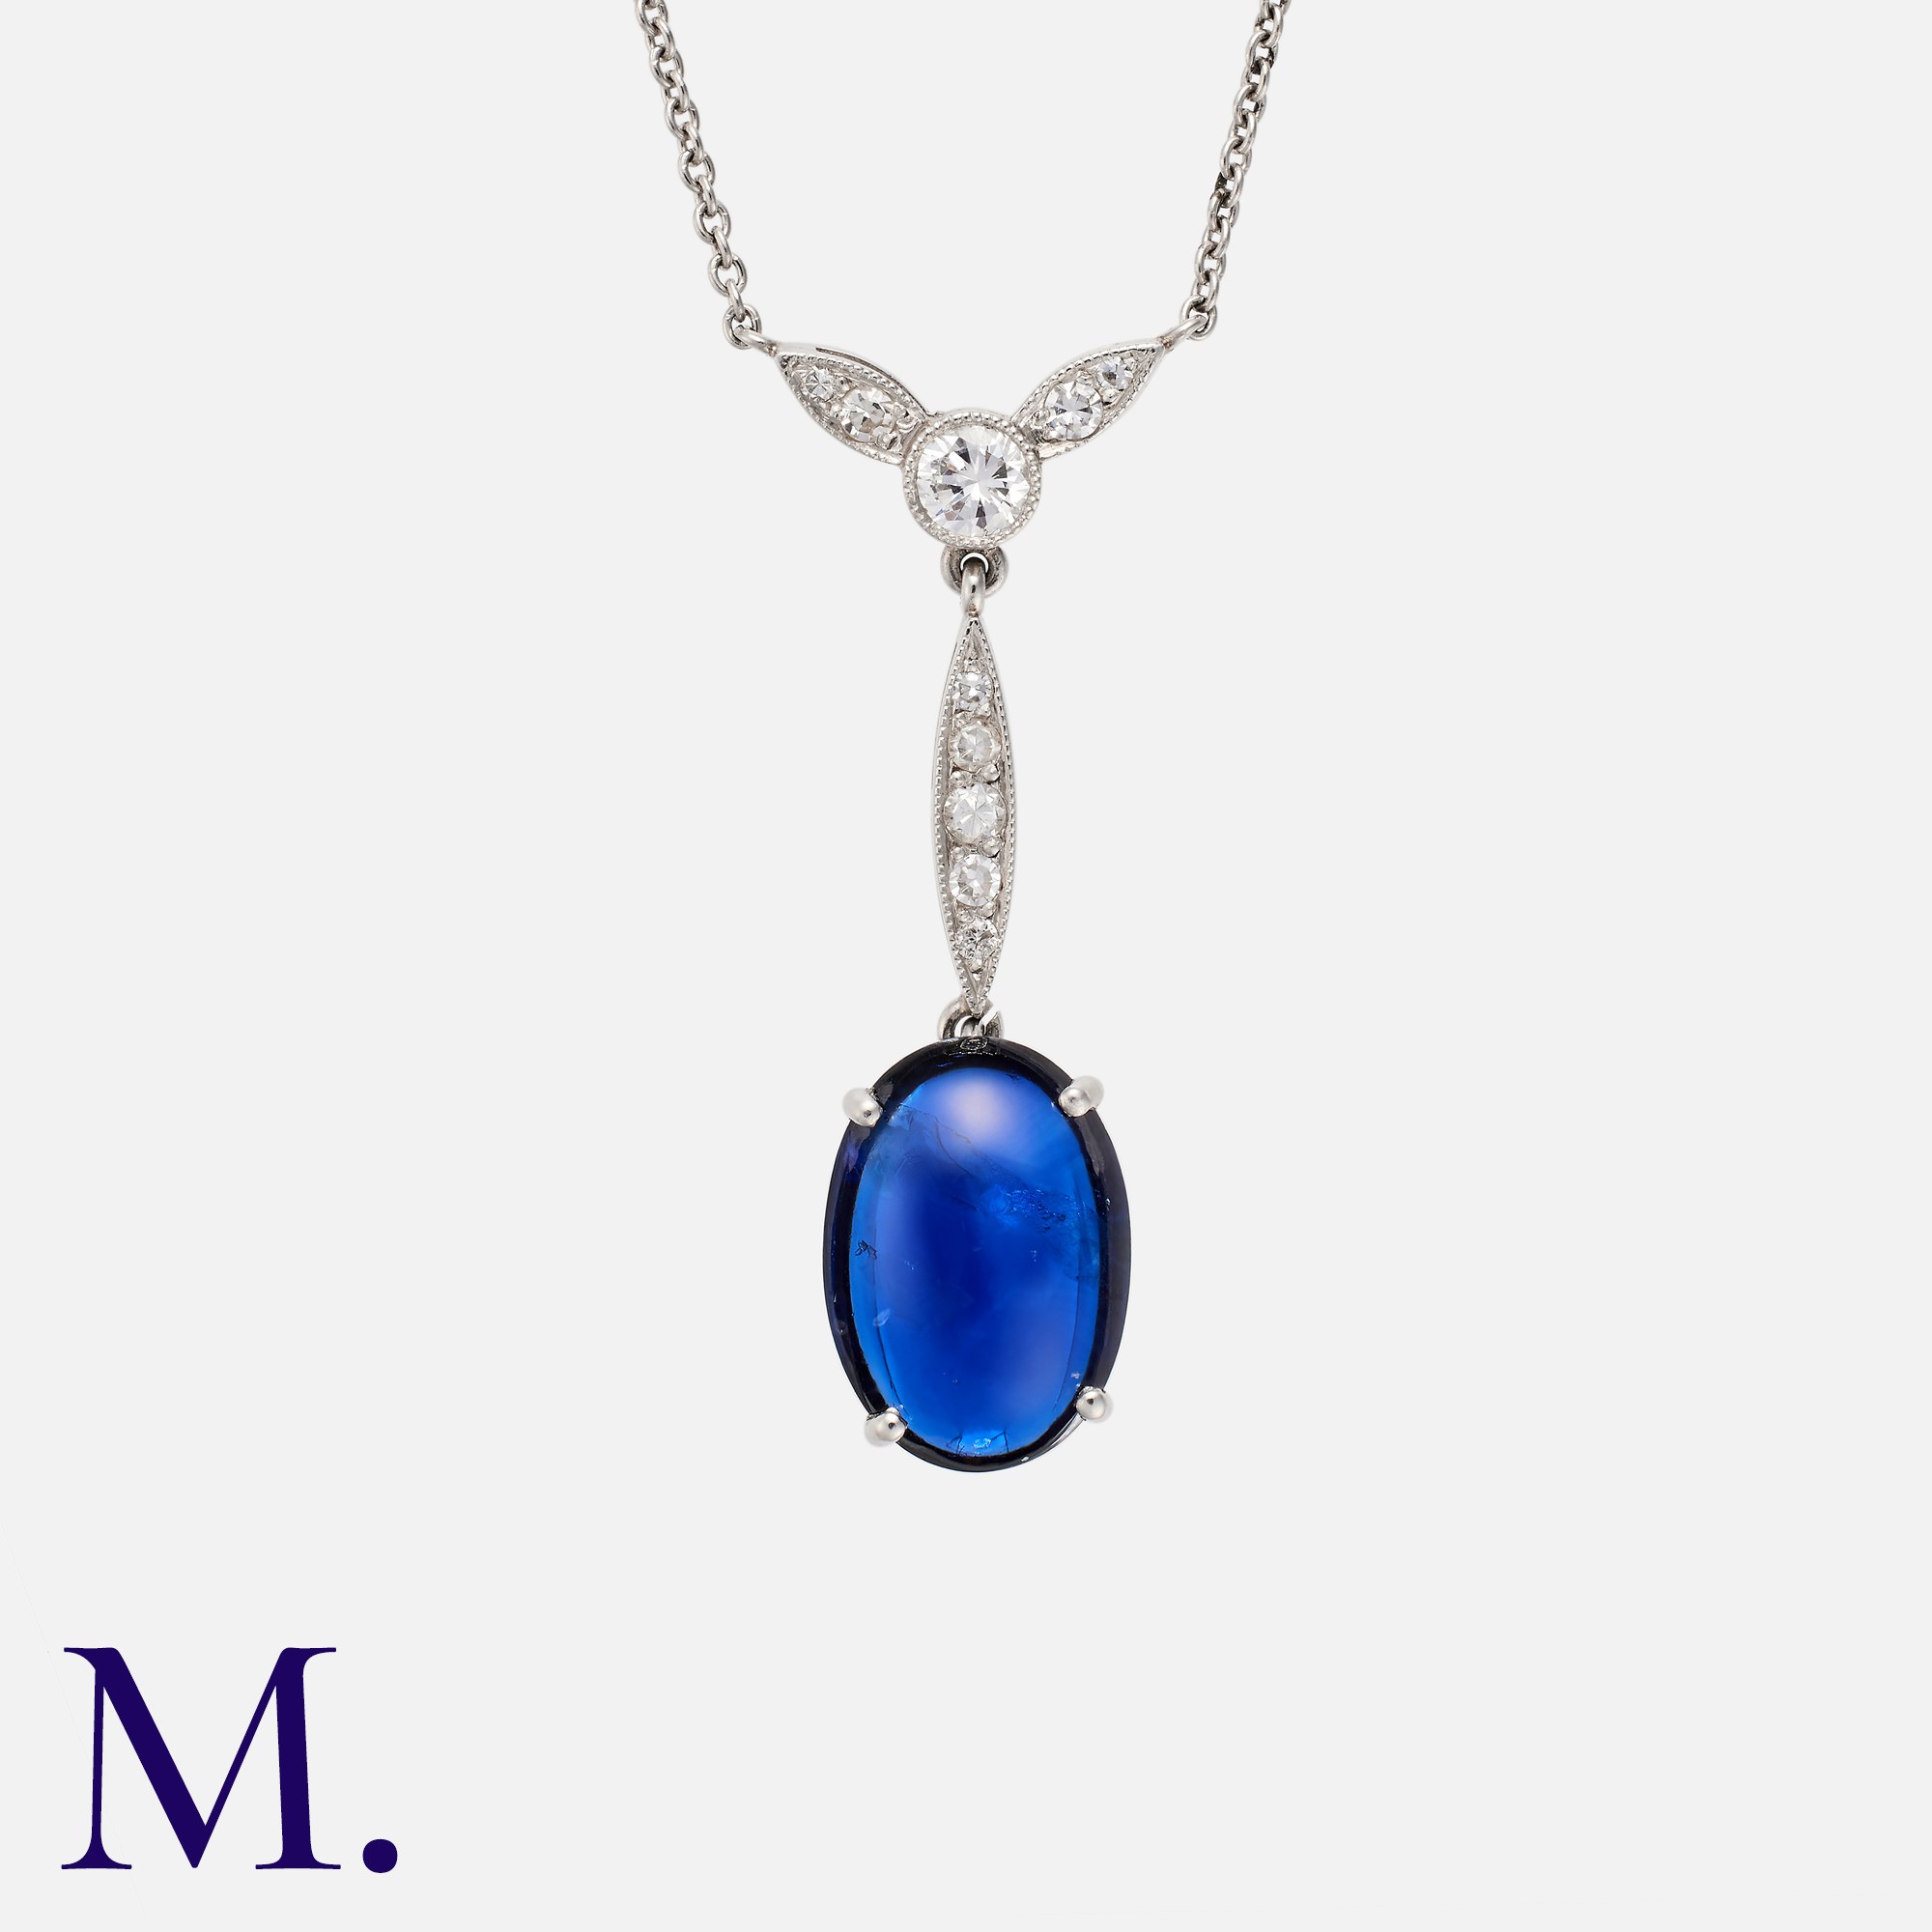 A Cabochon Sapphire And Diamond Pendant Necklace, in platinum comprising a cabochon blue sapphire of